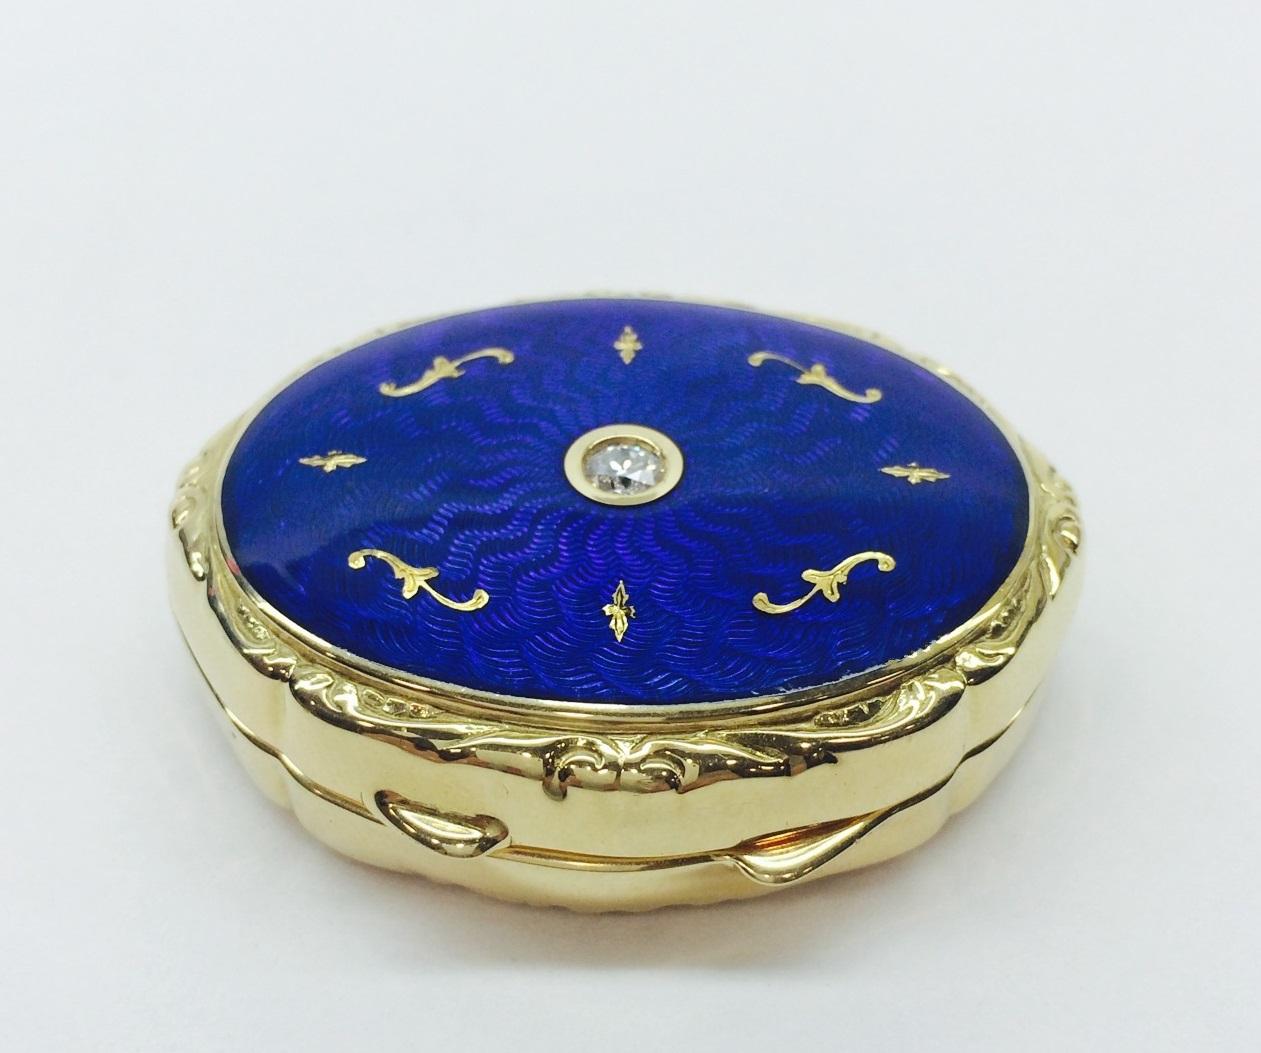 One Fabergé 18-karat yellow gold limited-edition French-guilloché blue enamel and diamond oval shaped pillbox. The box measures approximately 4.5 cm L x 3.5 cm W x 1.0 cm D and has a hinged cobalt-blue enameled top embellished with 24-Karat handmade